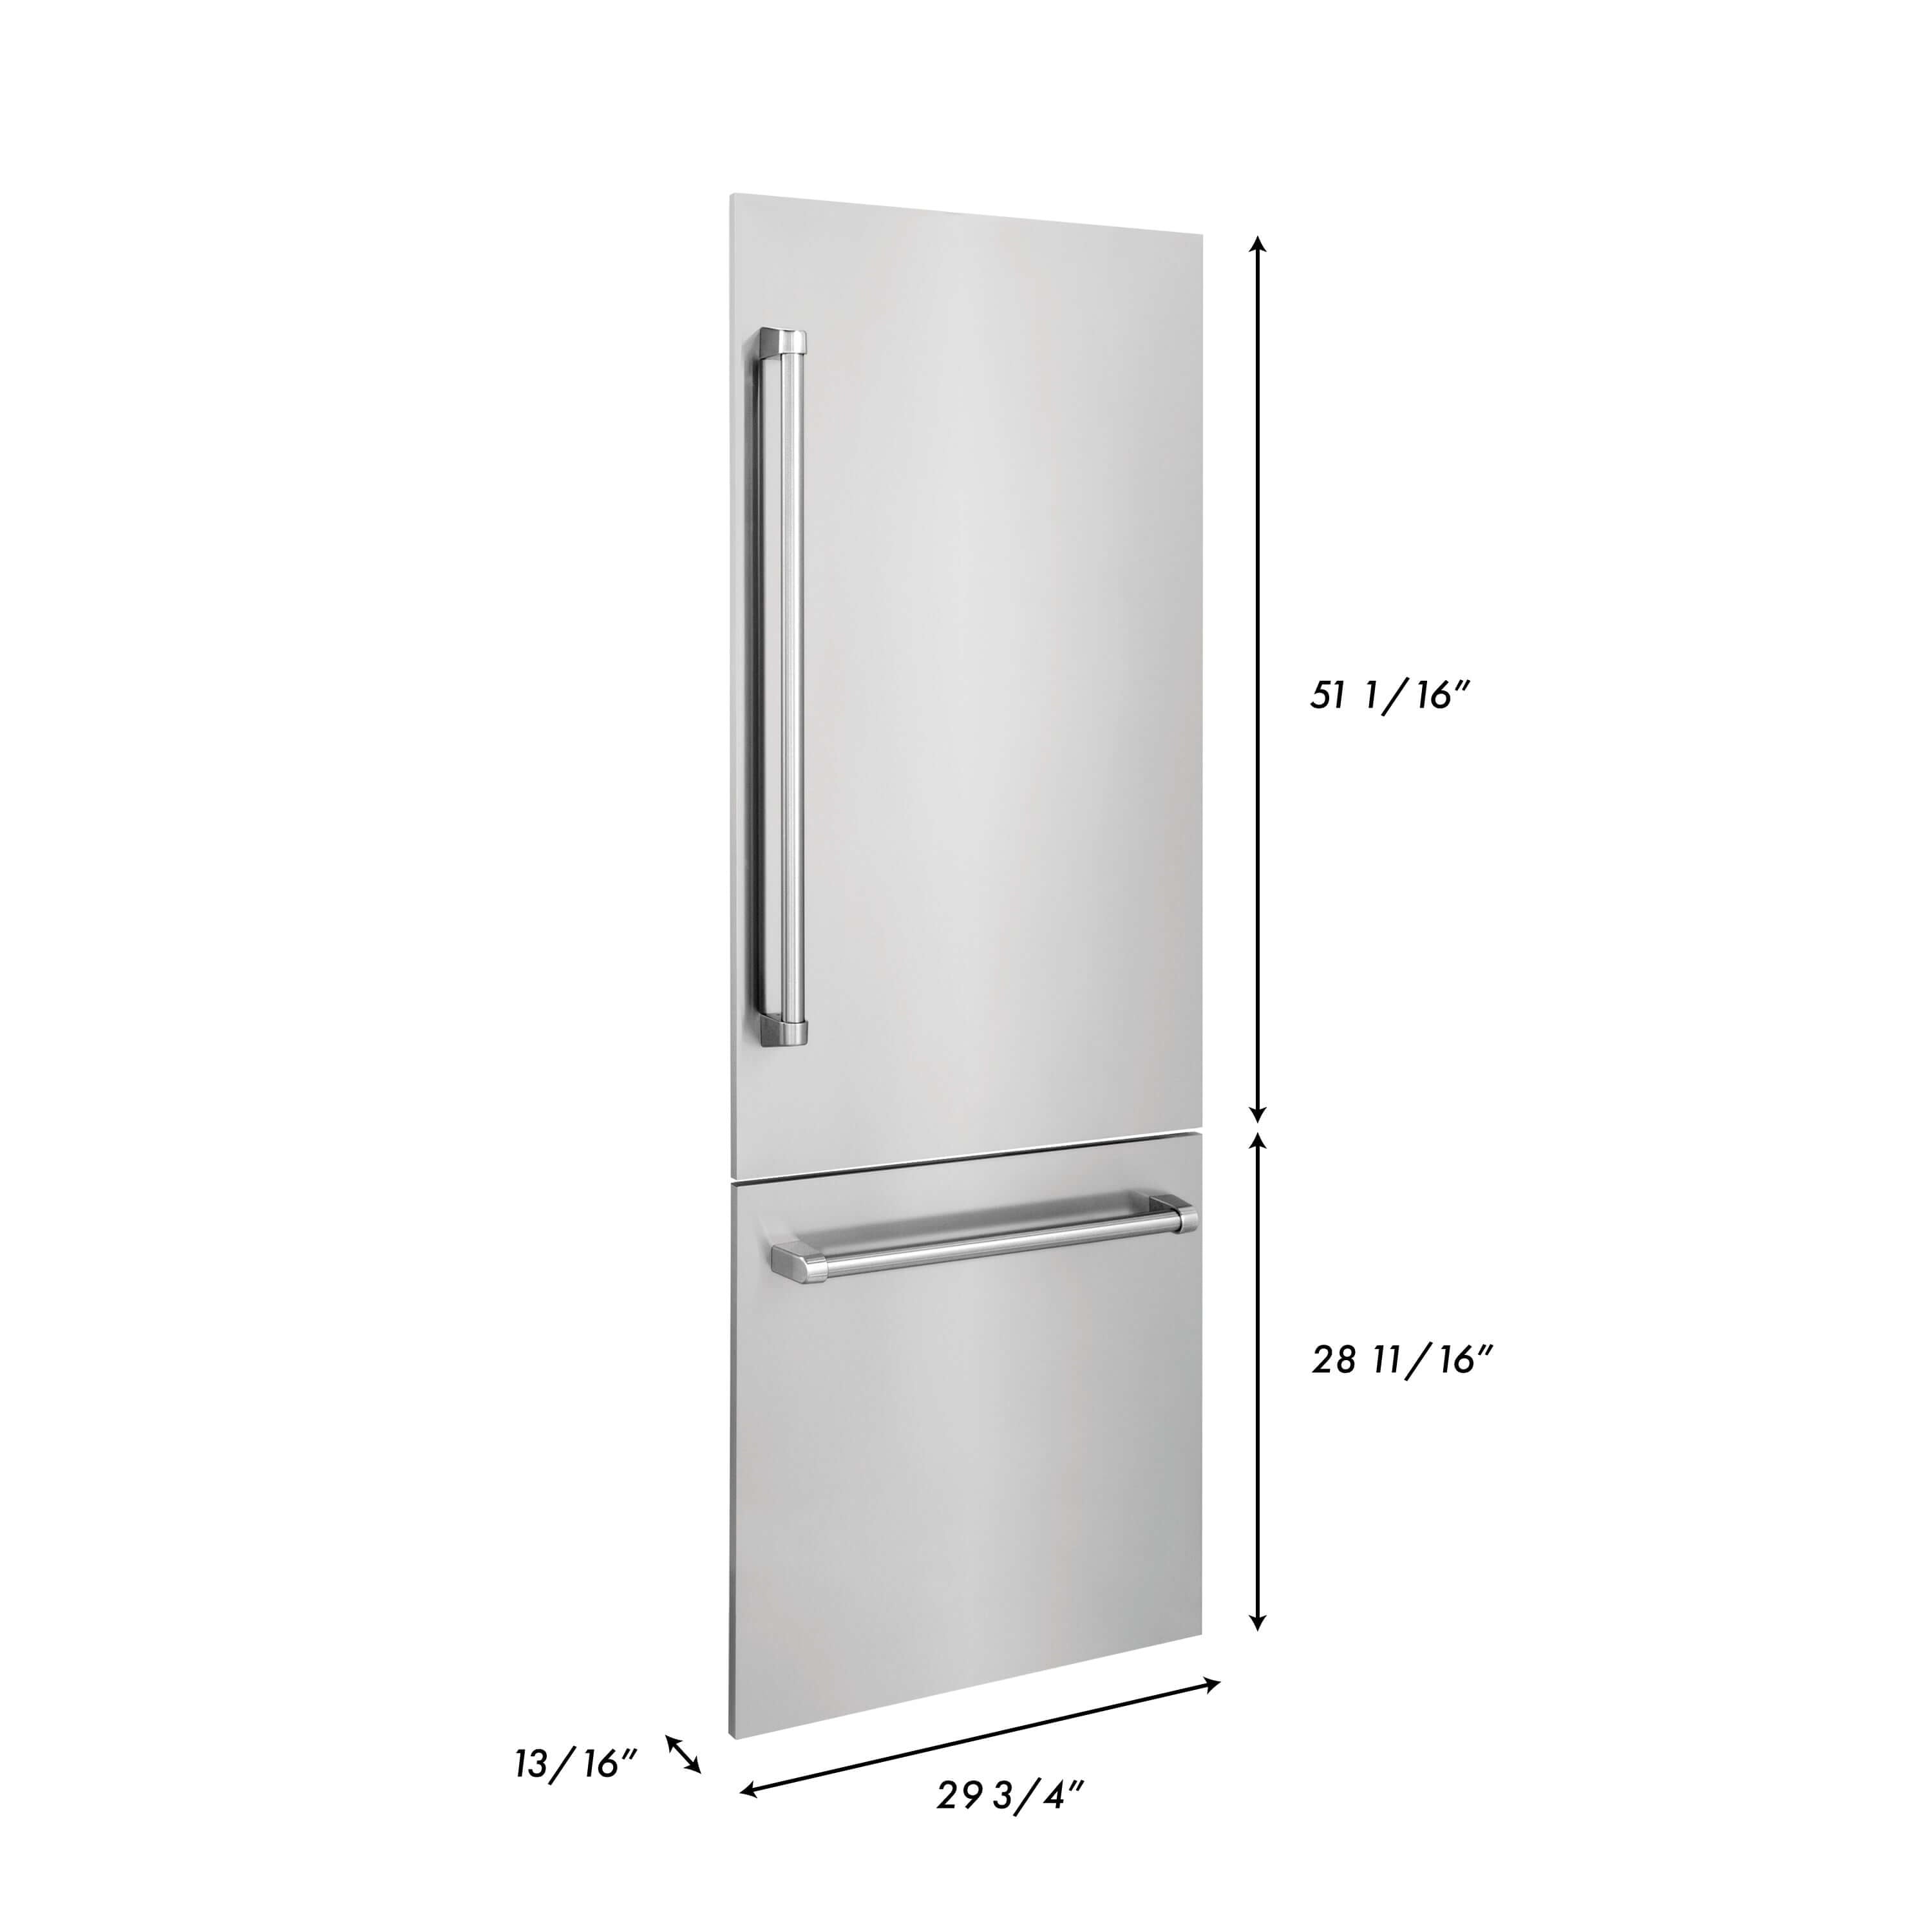 Panels & Handles Only- ZLINE 30 in. Refrigerator Panels in Stainless Steel for a 30 in. Built-in Refrigerator (RPBIV-304-30)